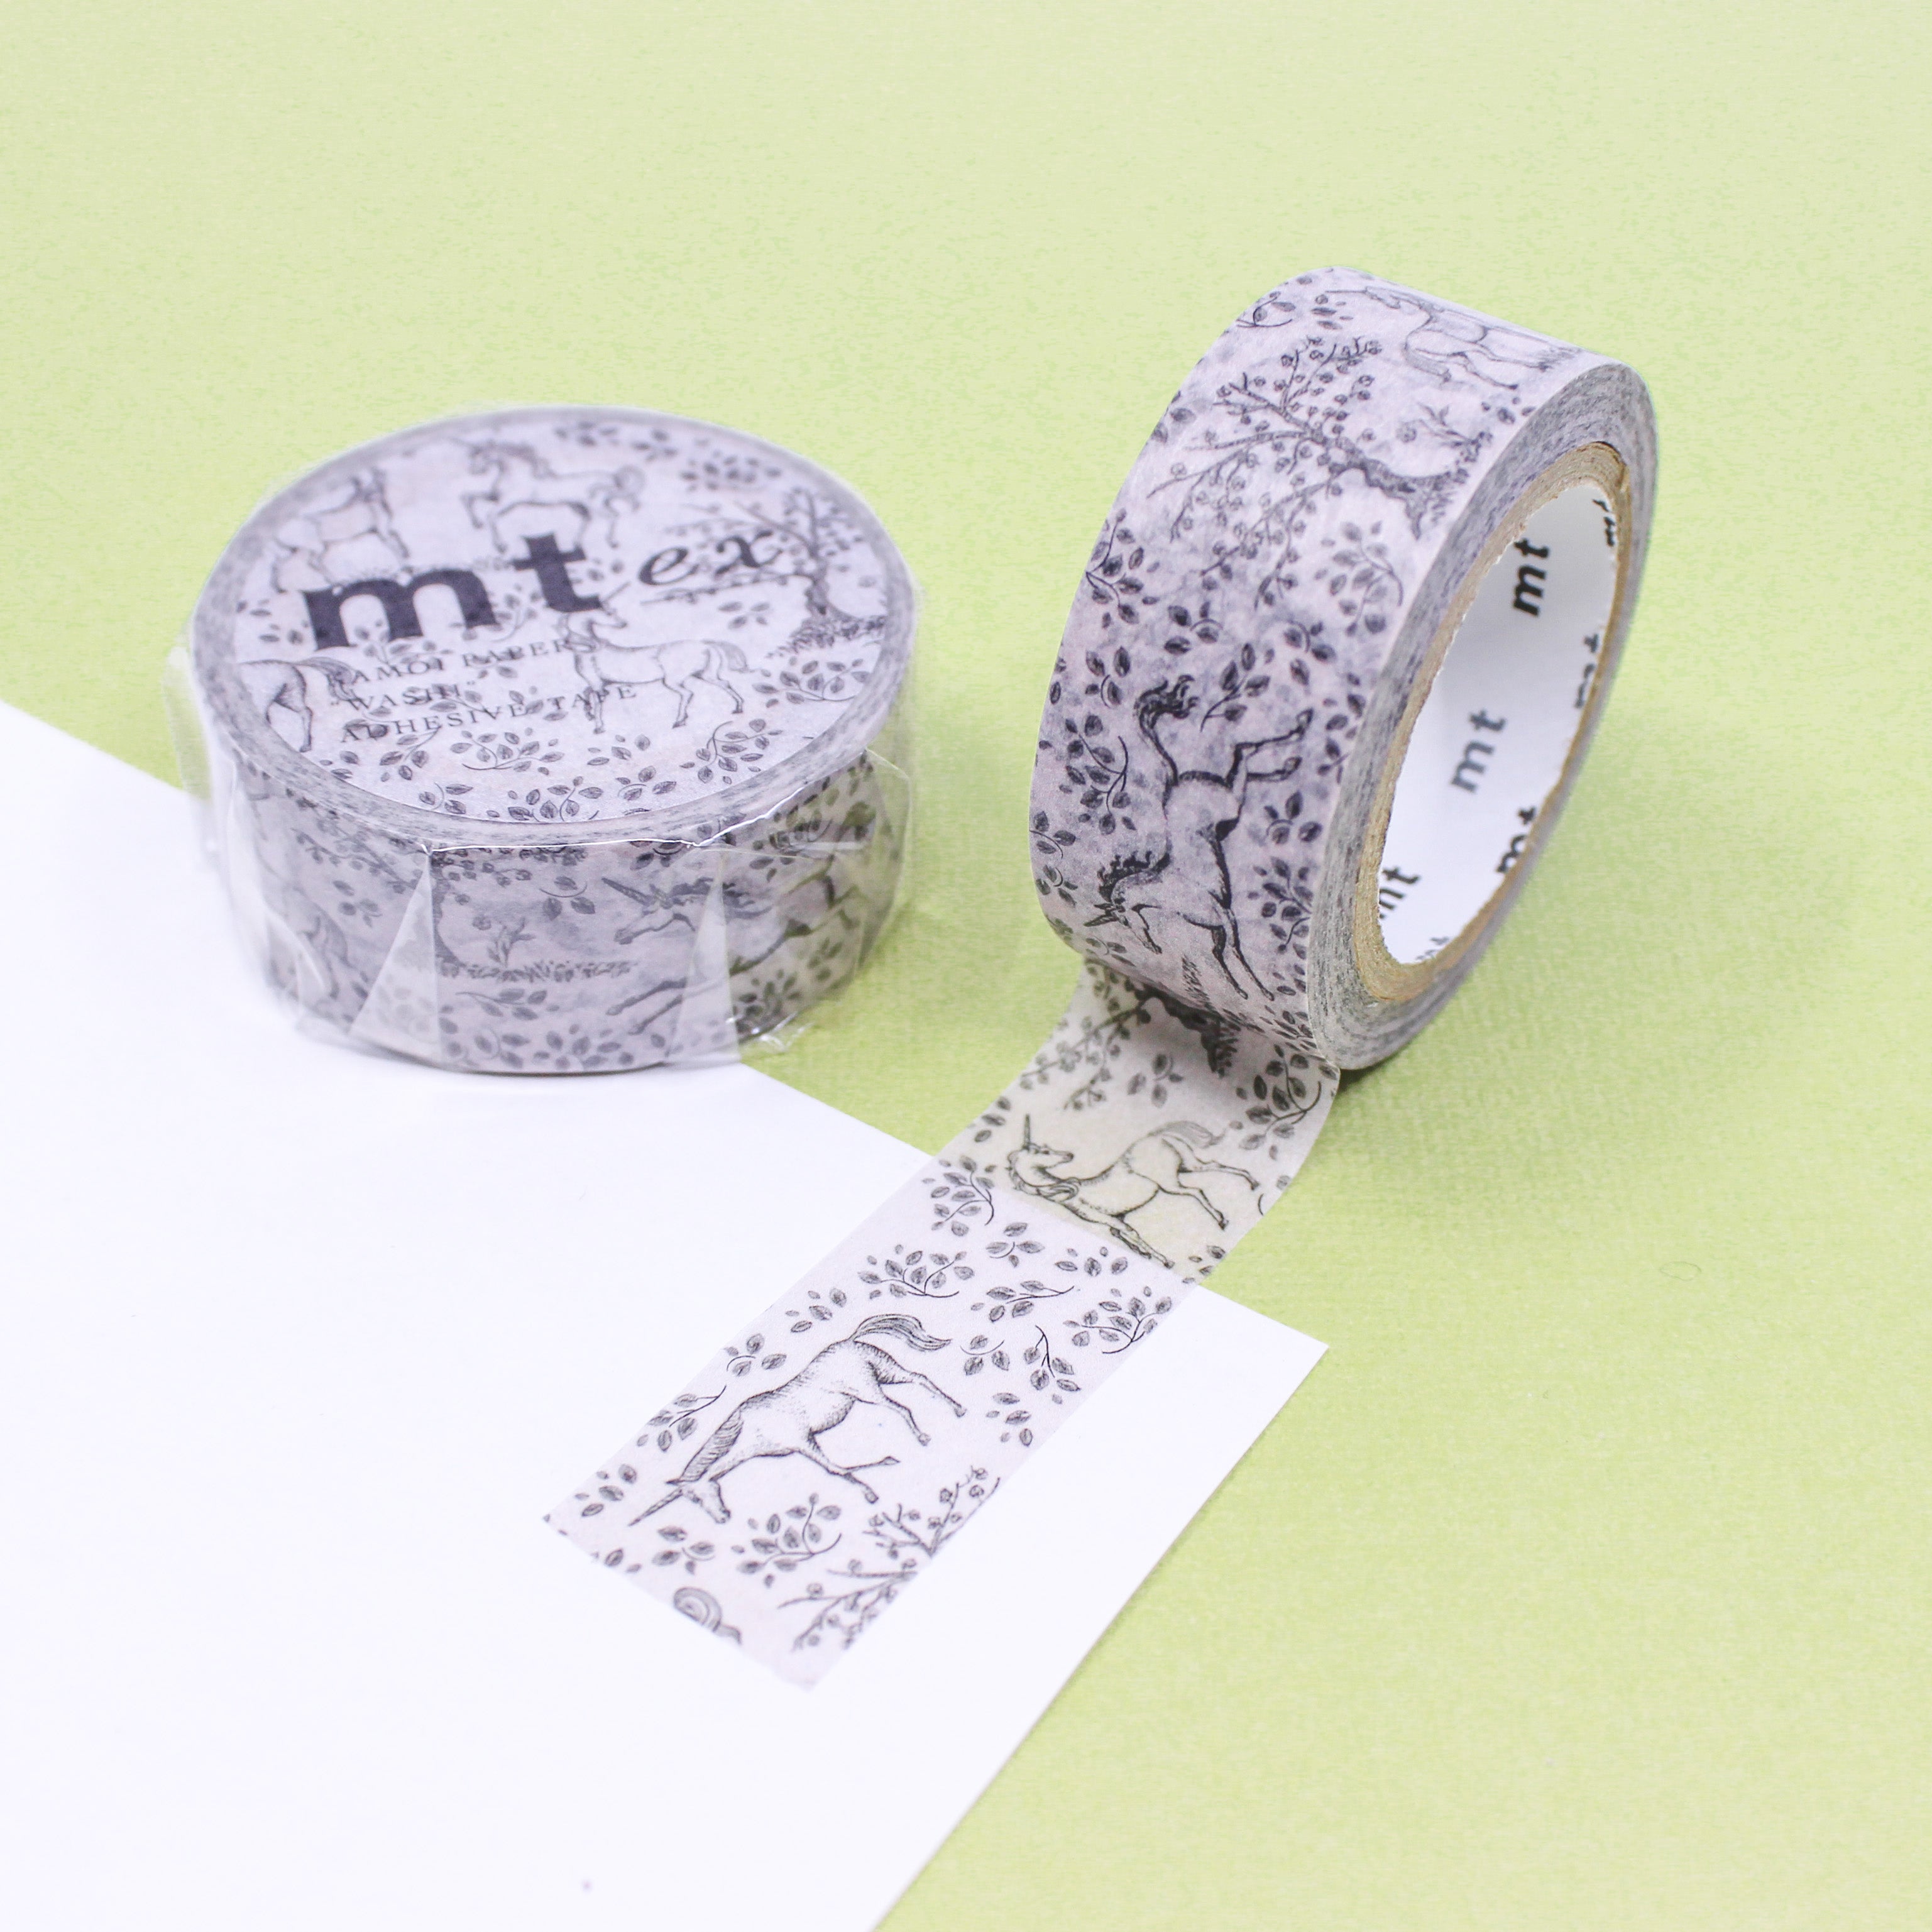 This Vintage Unicorn washi tape, adorned with a delightful unicorn illustration that harkens back to a bygone era, adds a unique and whimsical touch to your crafts. This tape is from MT Brand Masking Tape and sold at BBB Supplies Craft Shop.